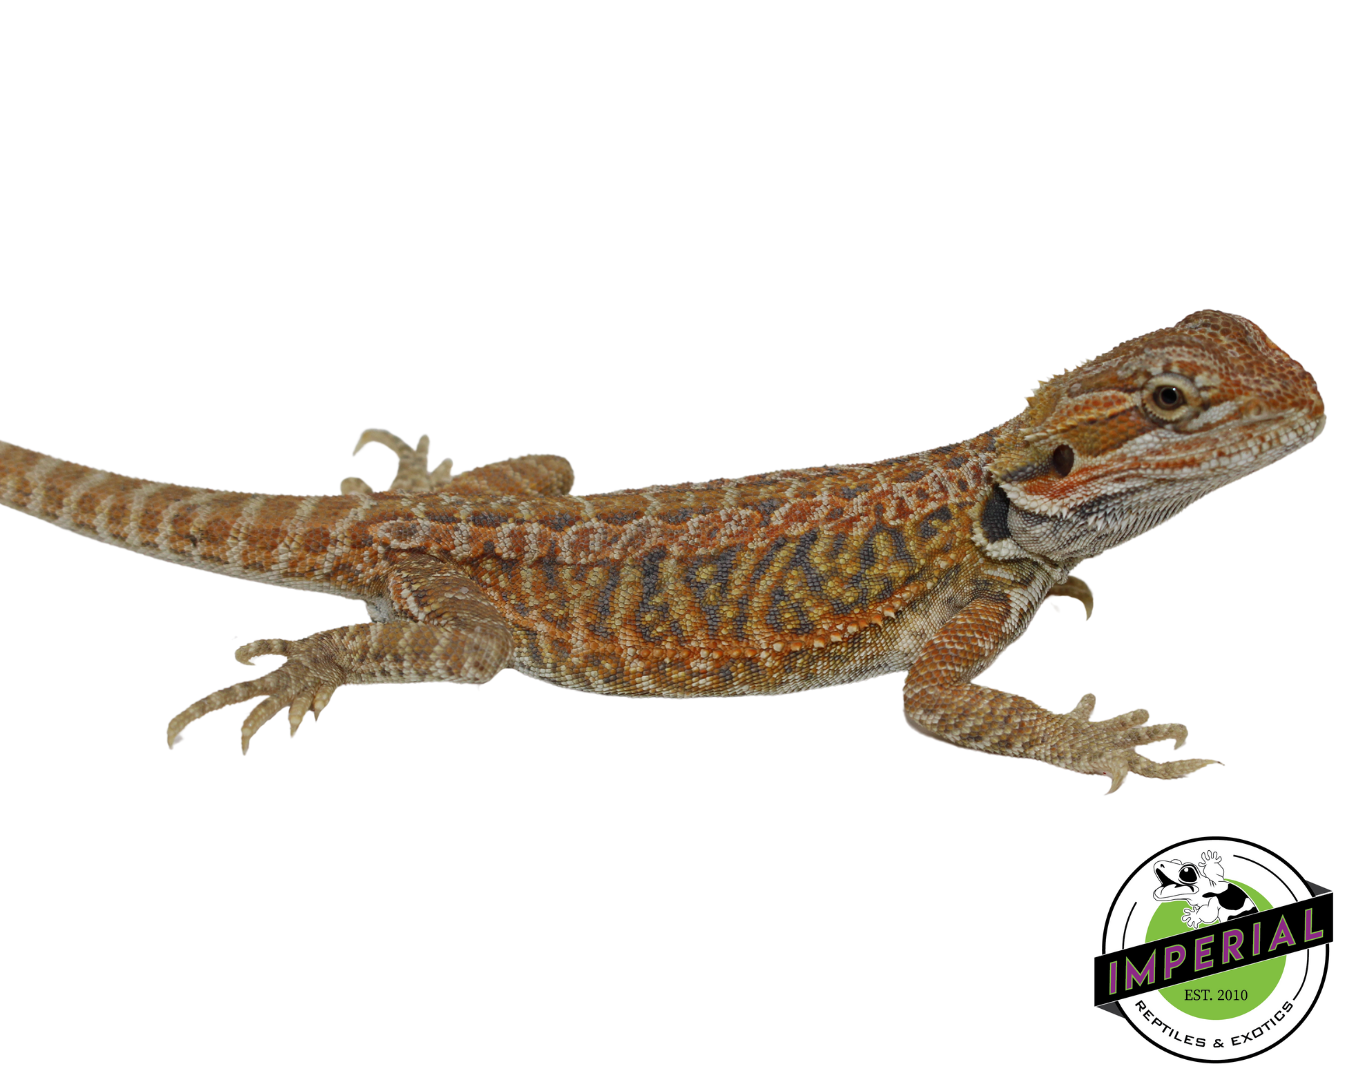 blue bar bearded dragon for sale, reptiles for sale, buy animals online